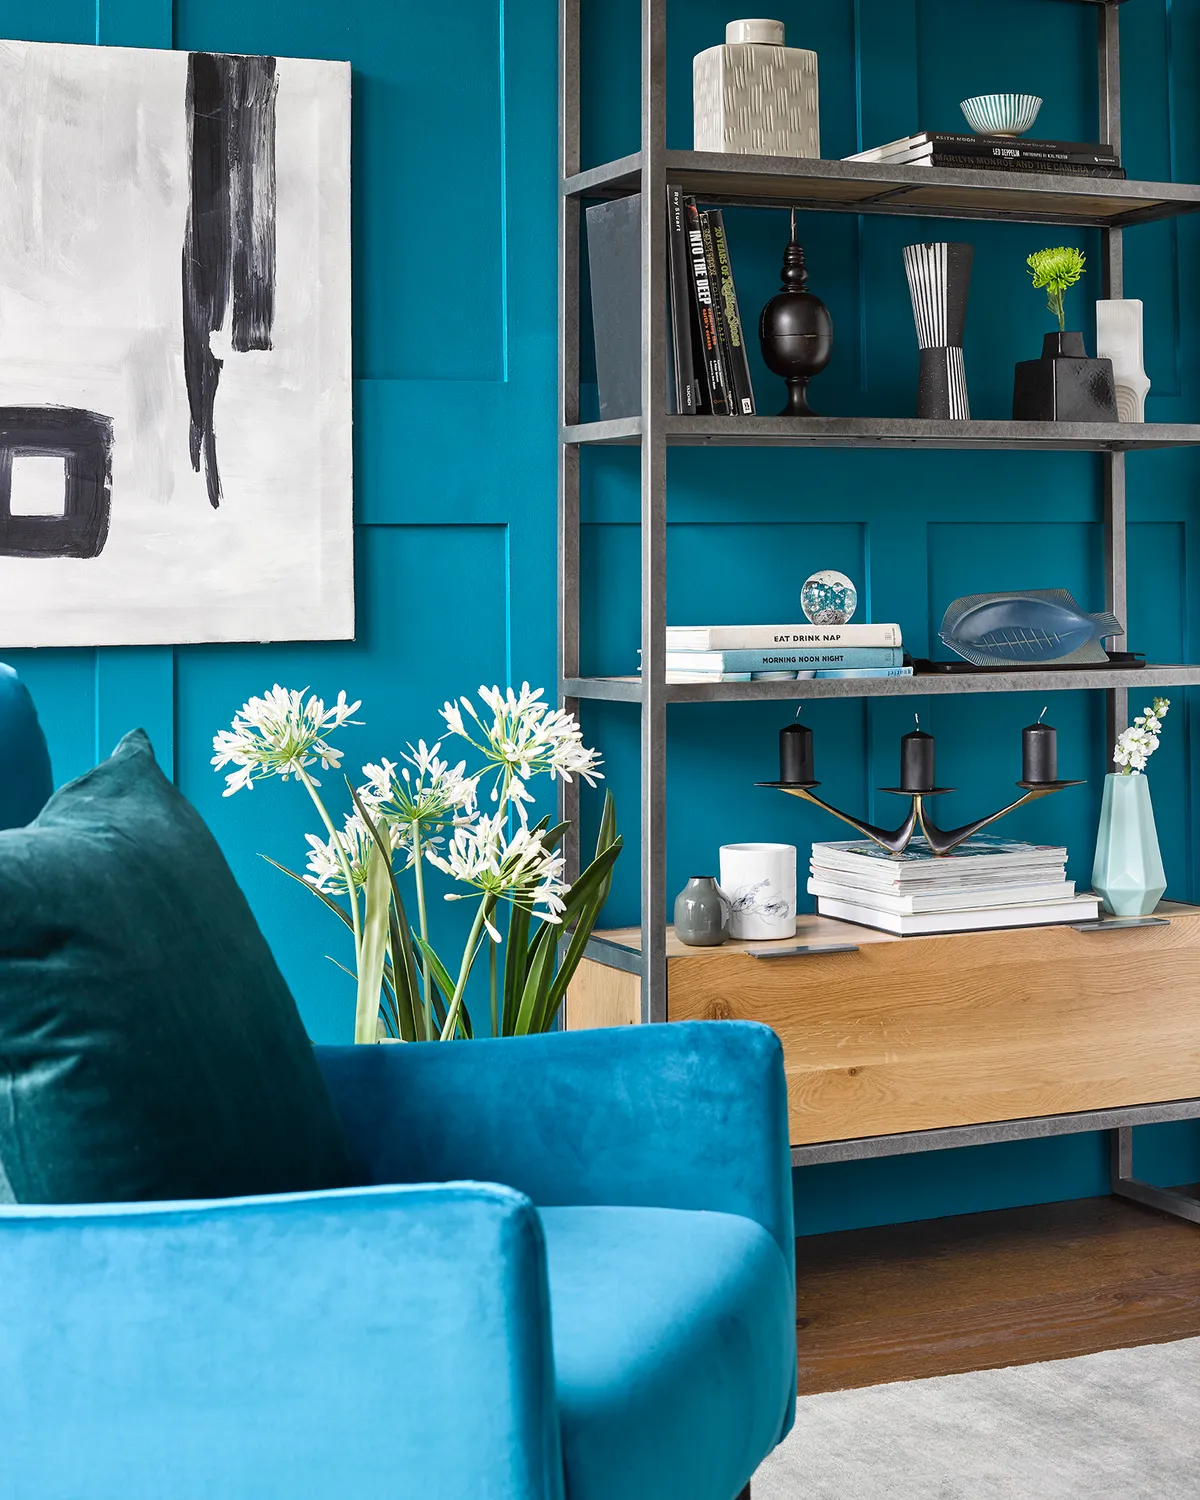 Bring bright cyan blue to life with pine furniture and fresh flowers. Image by Oak Furnitureland. 